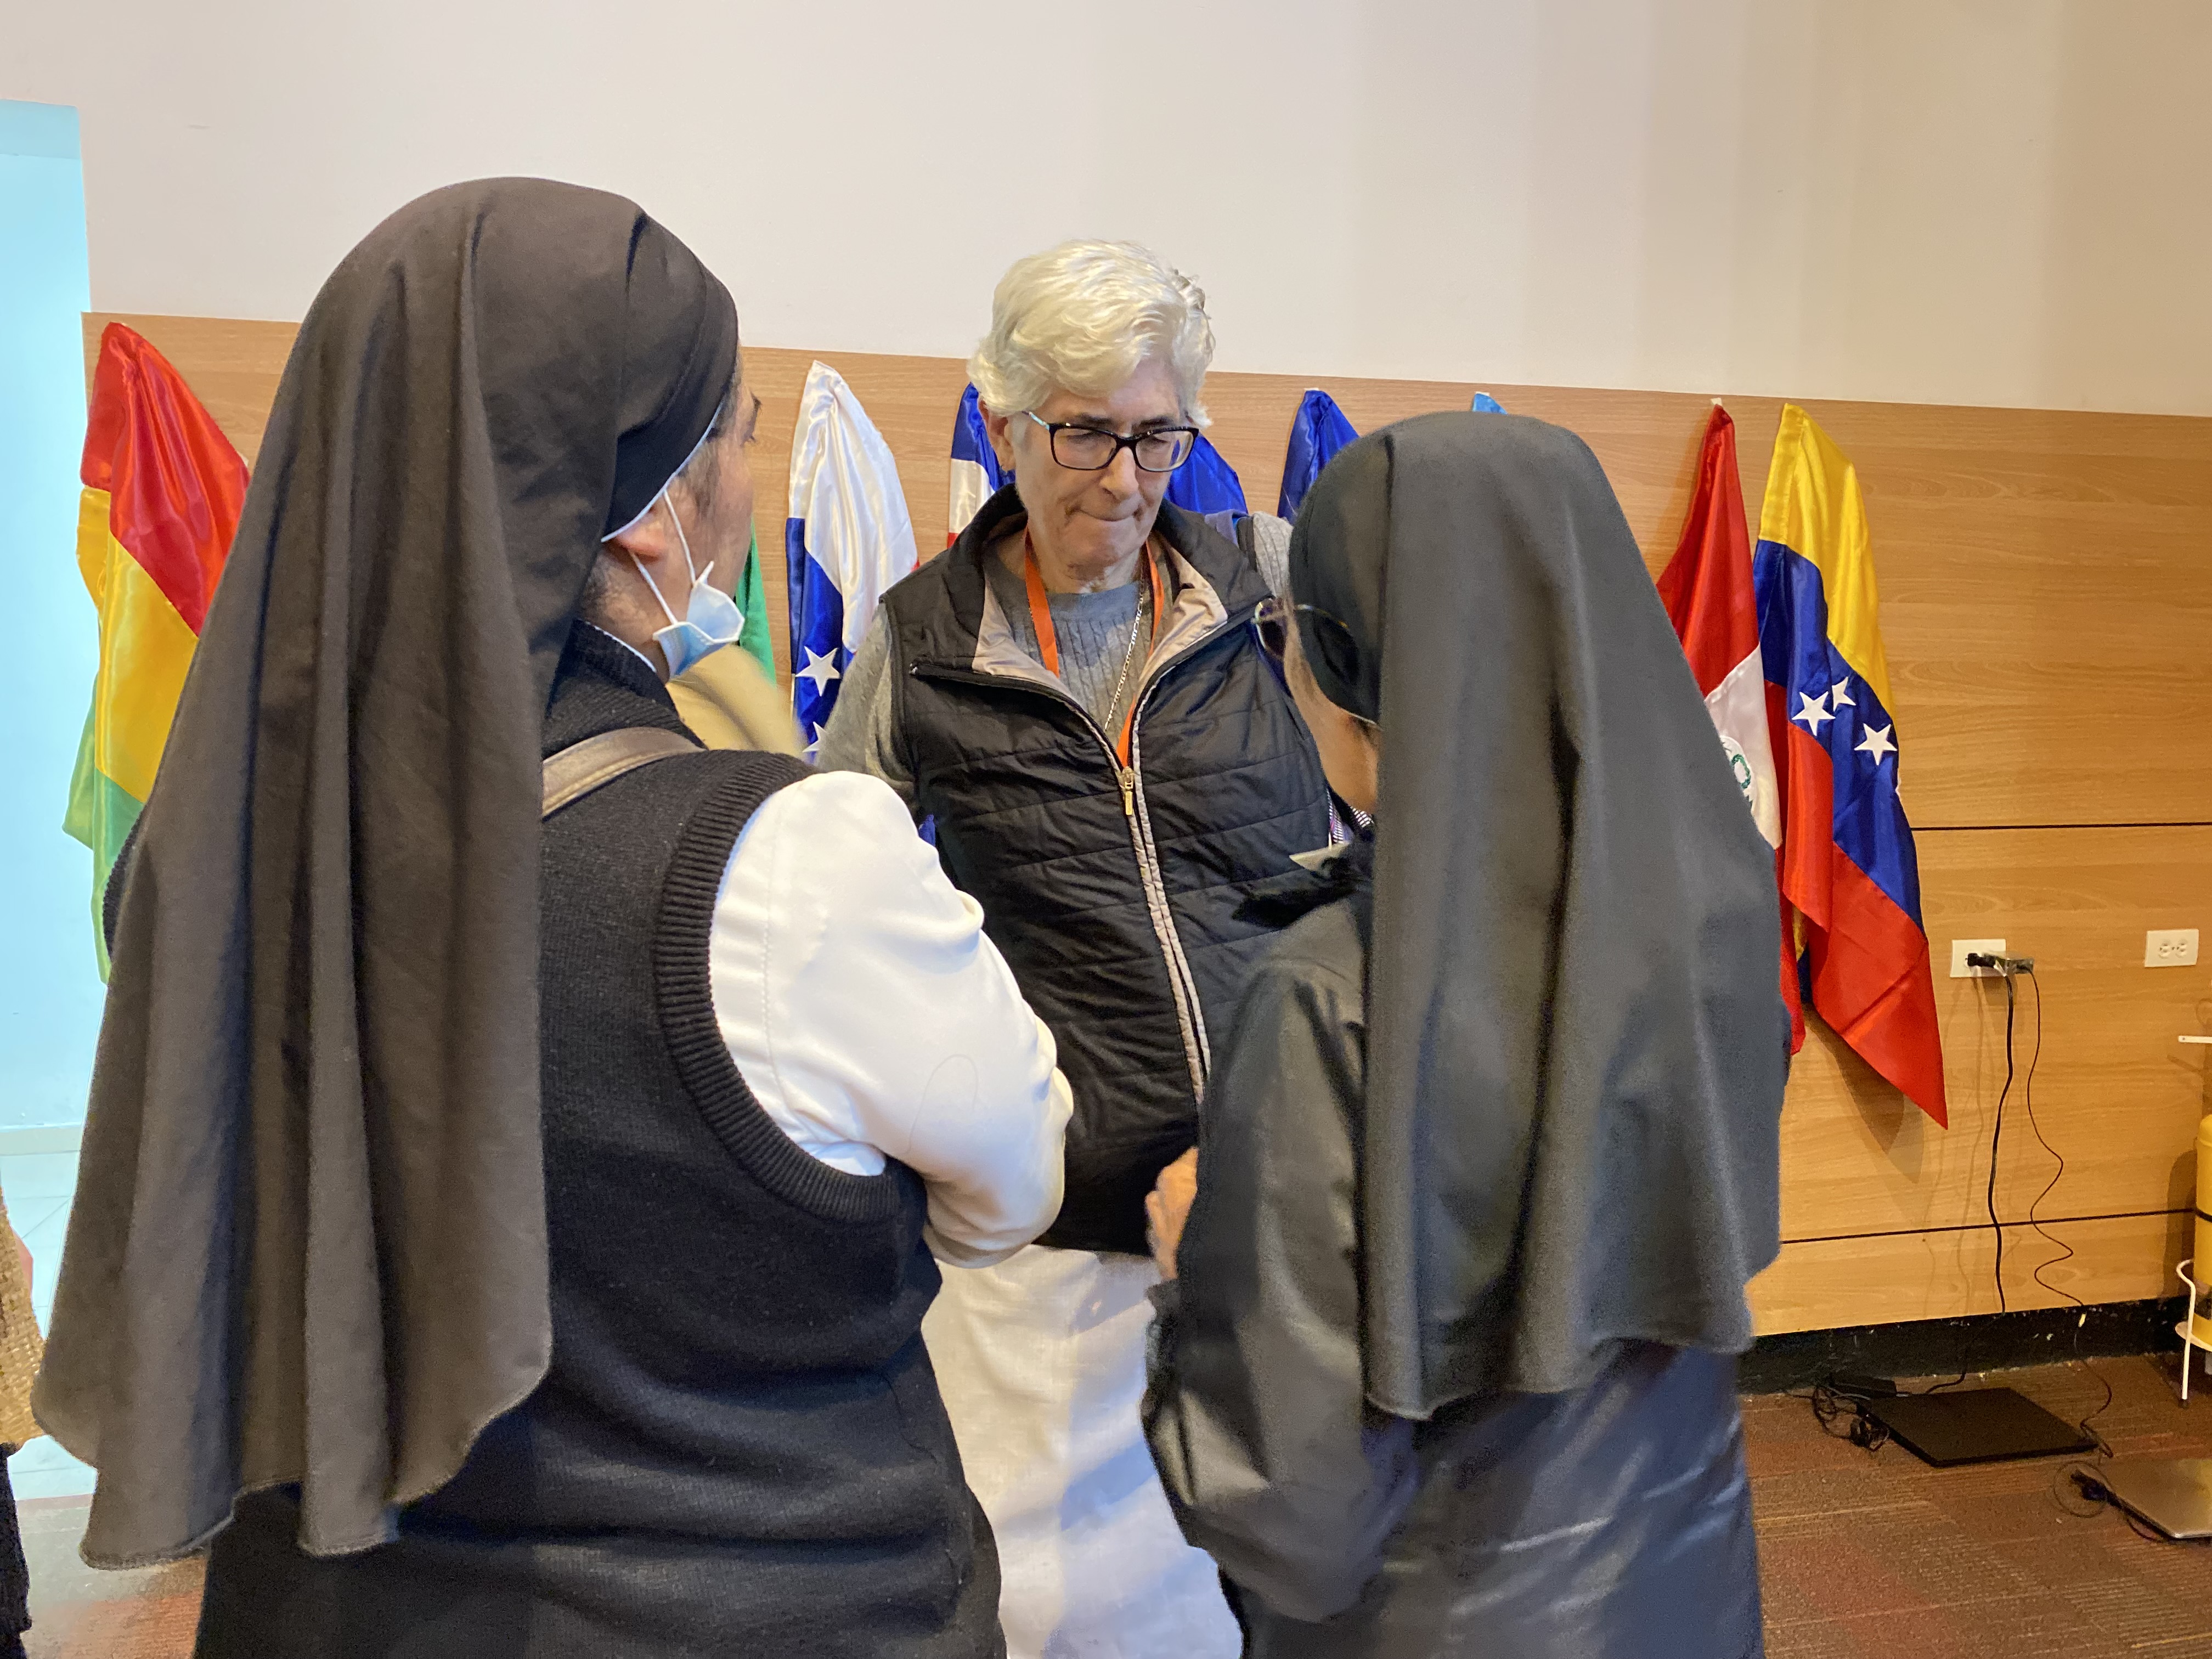 Sr. Maria de los Dolores Palencia Gómez, of the Sisters of St. Joseph of Lyon, who works with migrants in Mexico, stops to chat with two sisters in Bogotá, Colombia, Nov. 24.